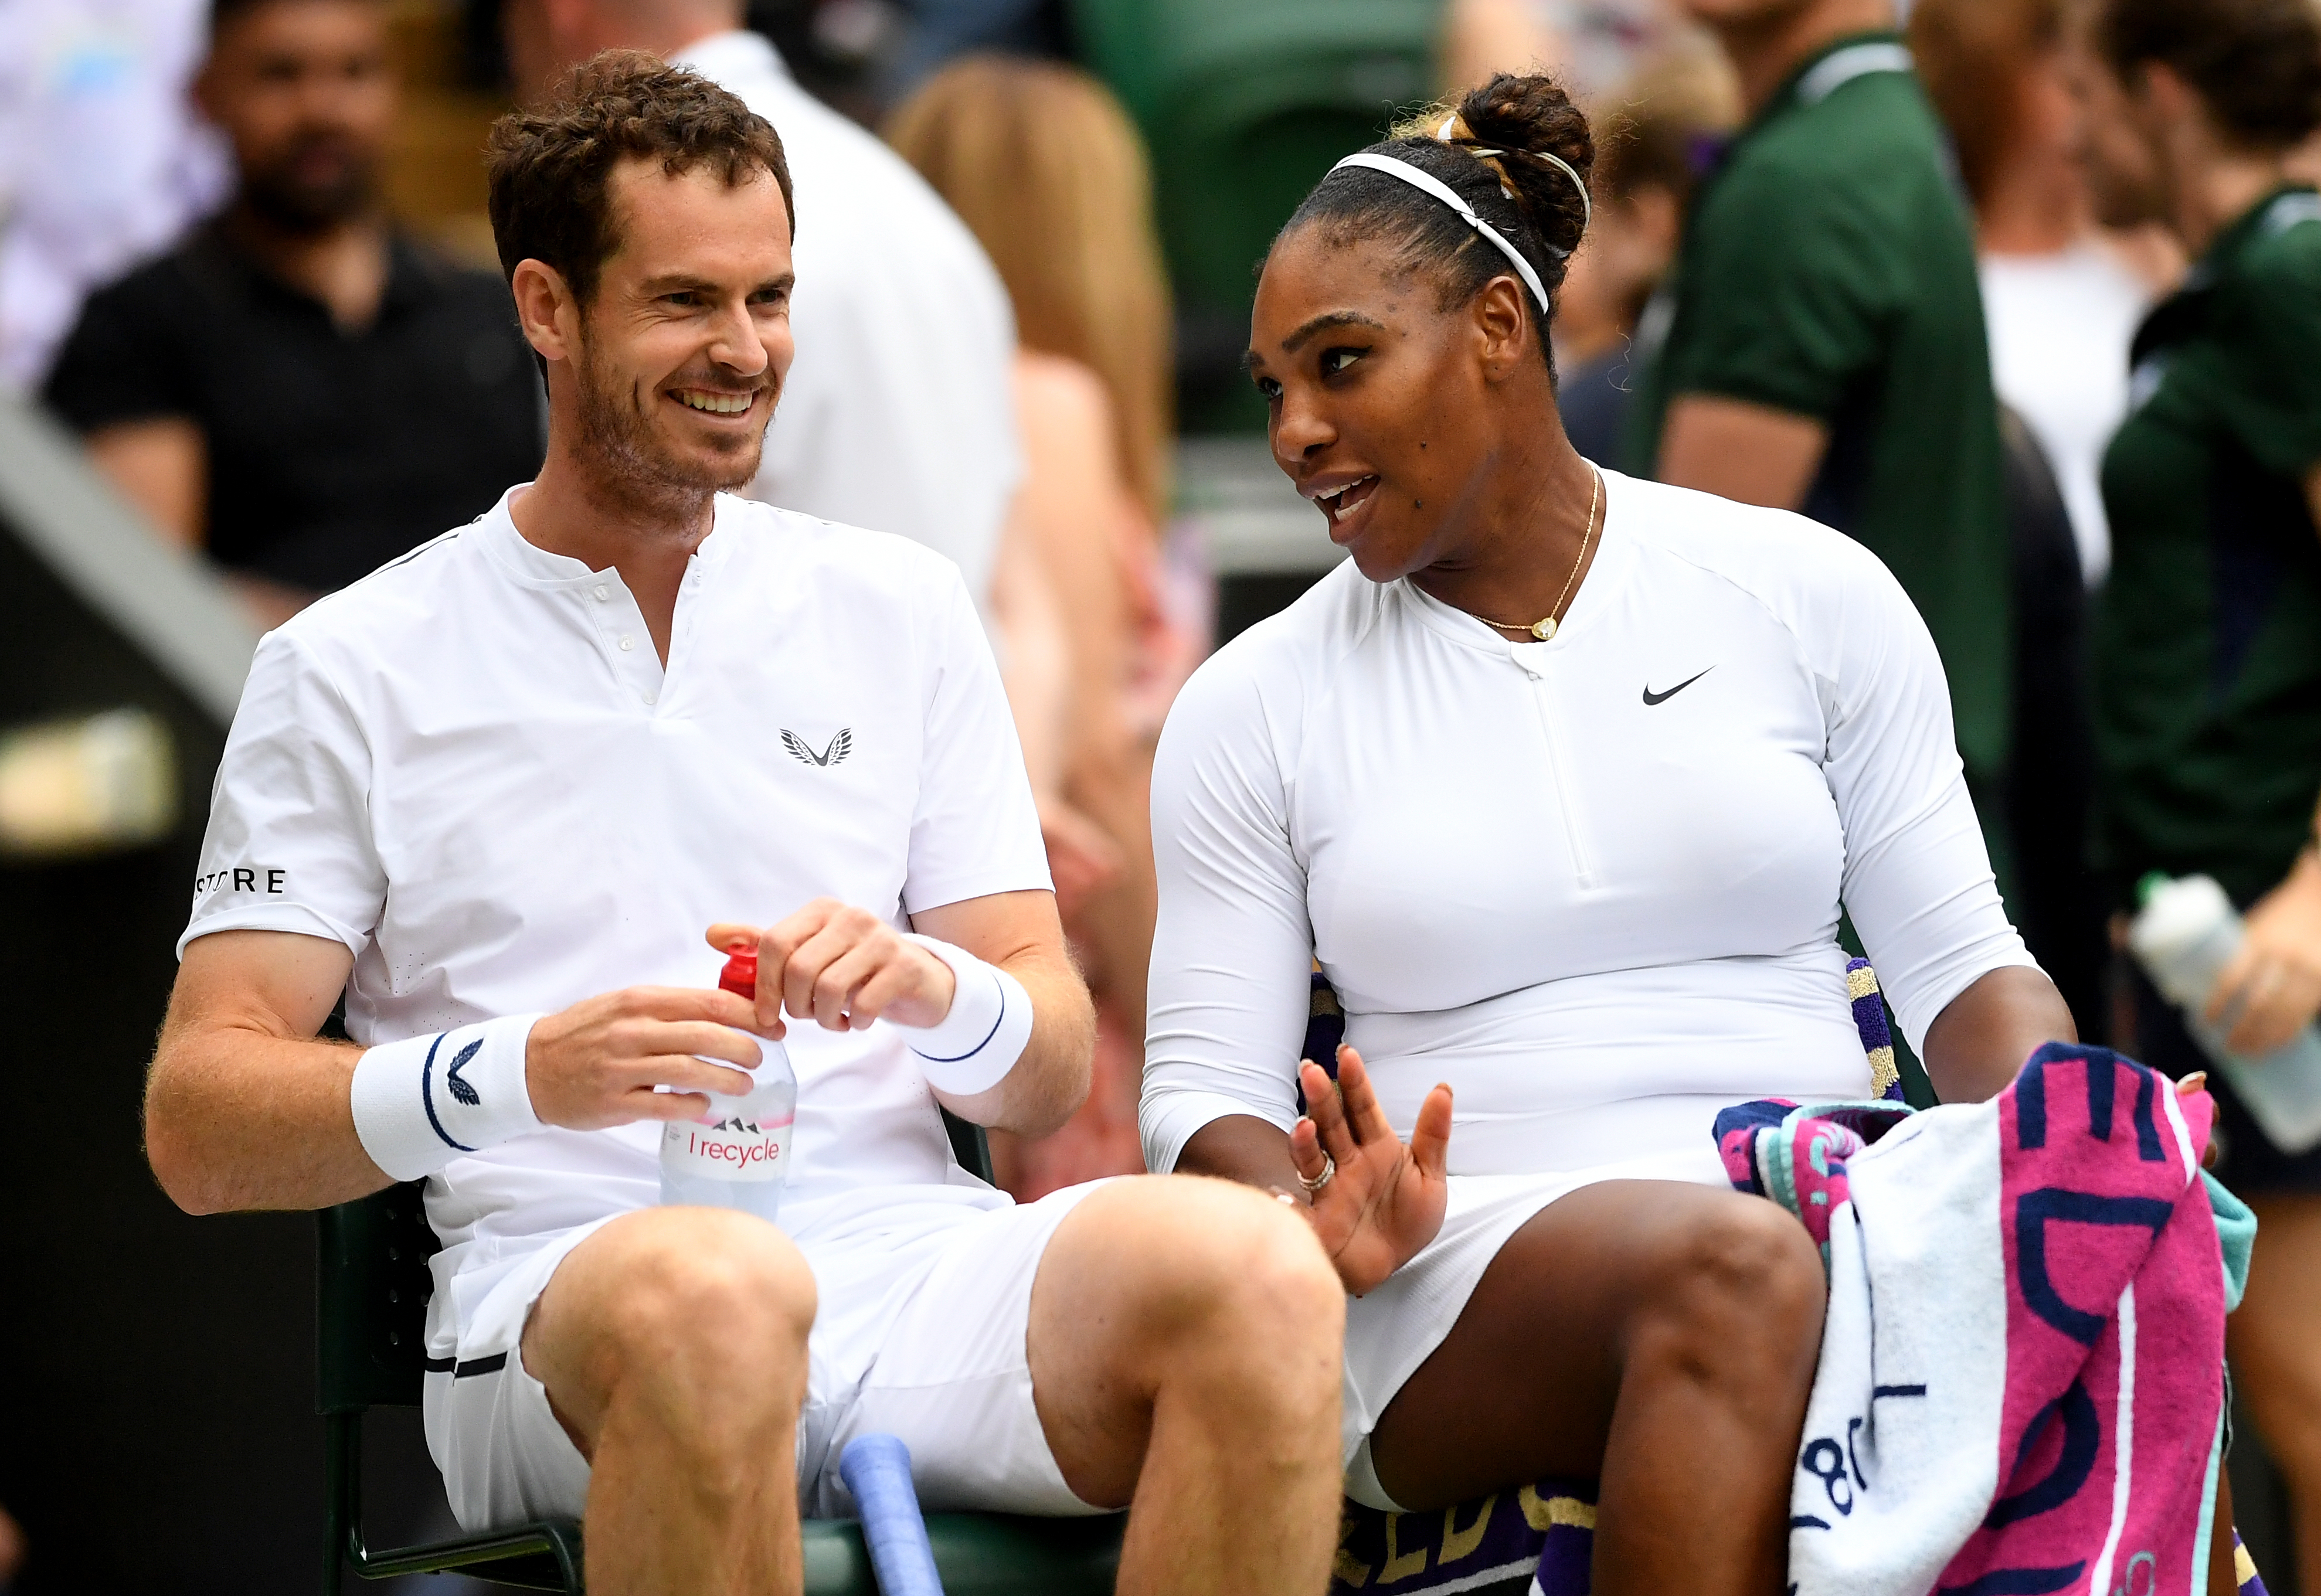 Andy Murray and Serena Williams during their mixed doubles match on day eight of the Wimbledon Championships at the All England Lawn Tennis and Croquet Club, Wimbledon.